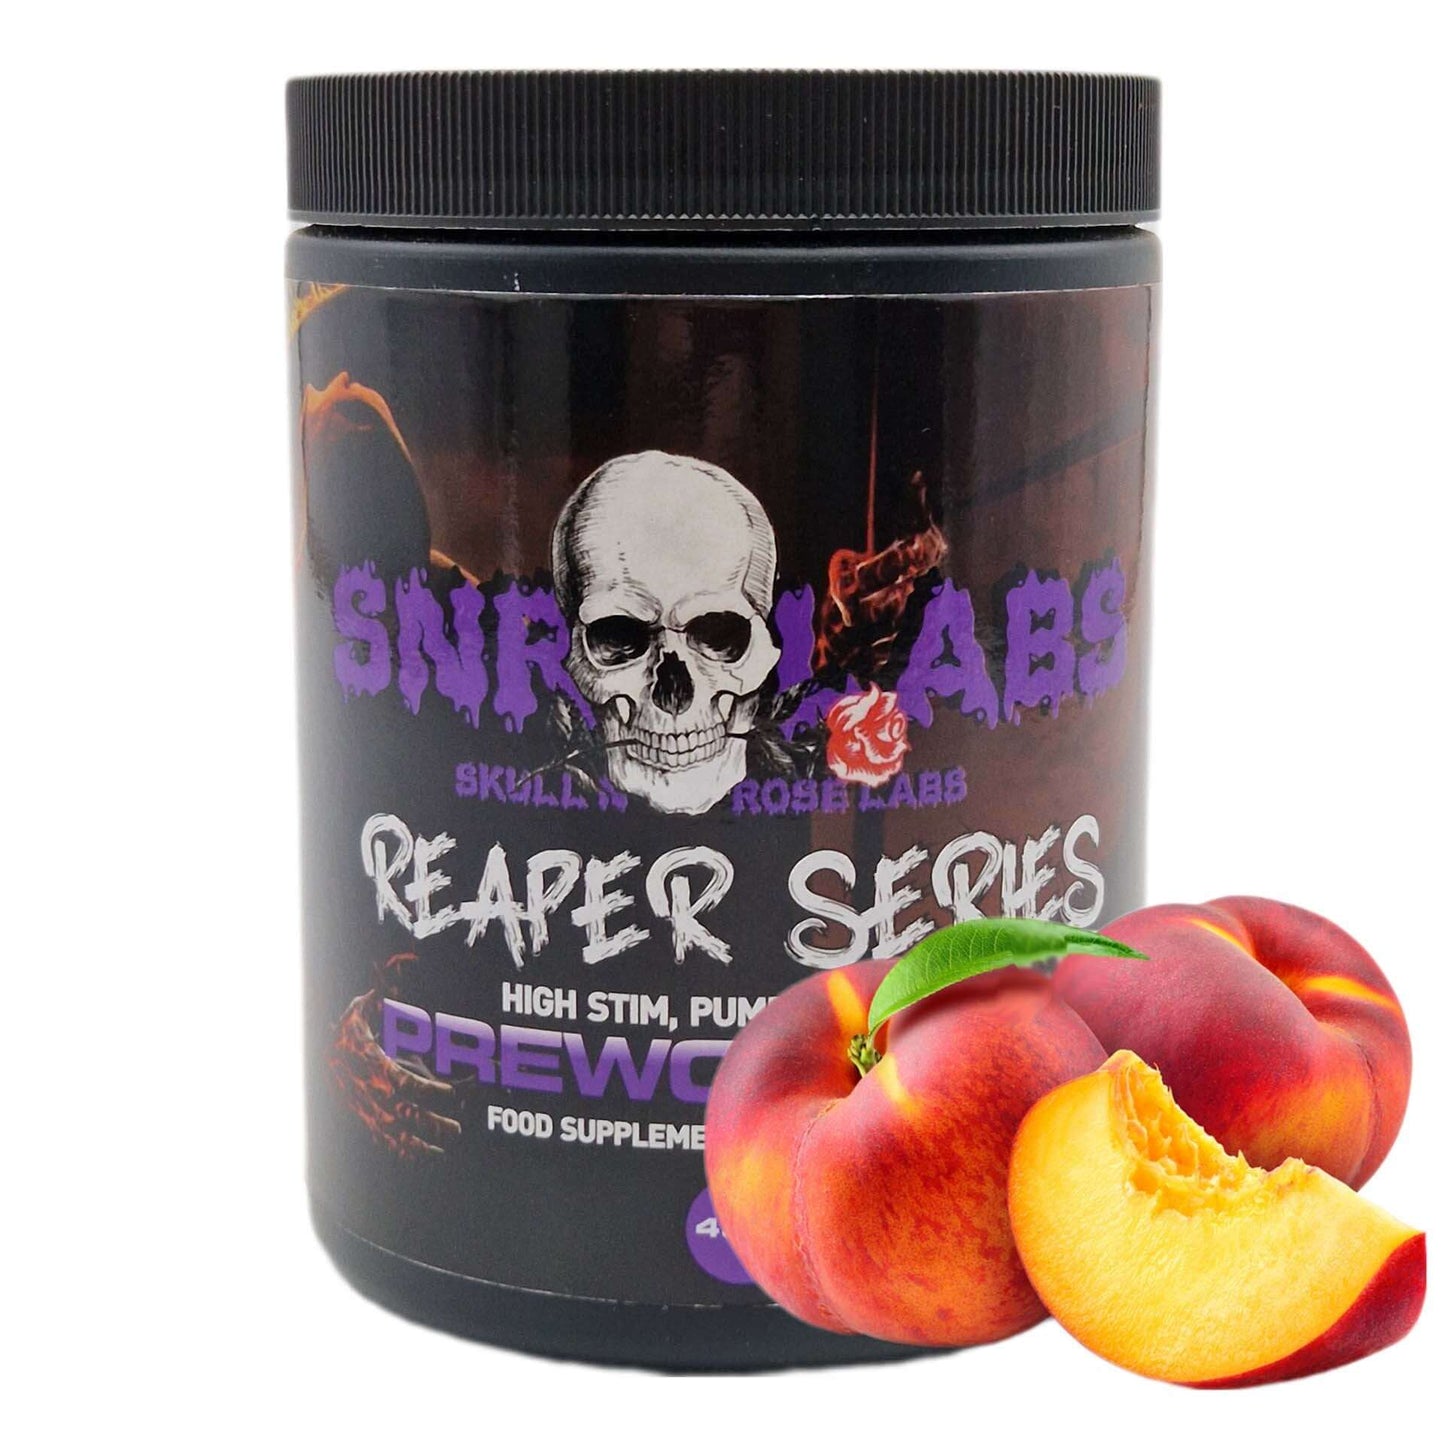 SNRLabs Reaper Series Pre Work Out fruit